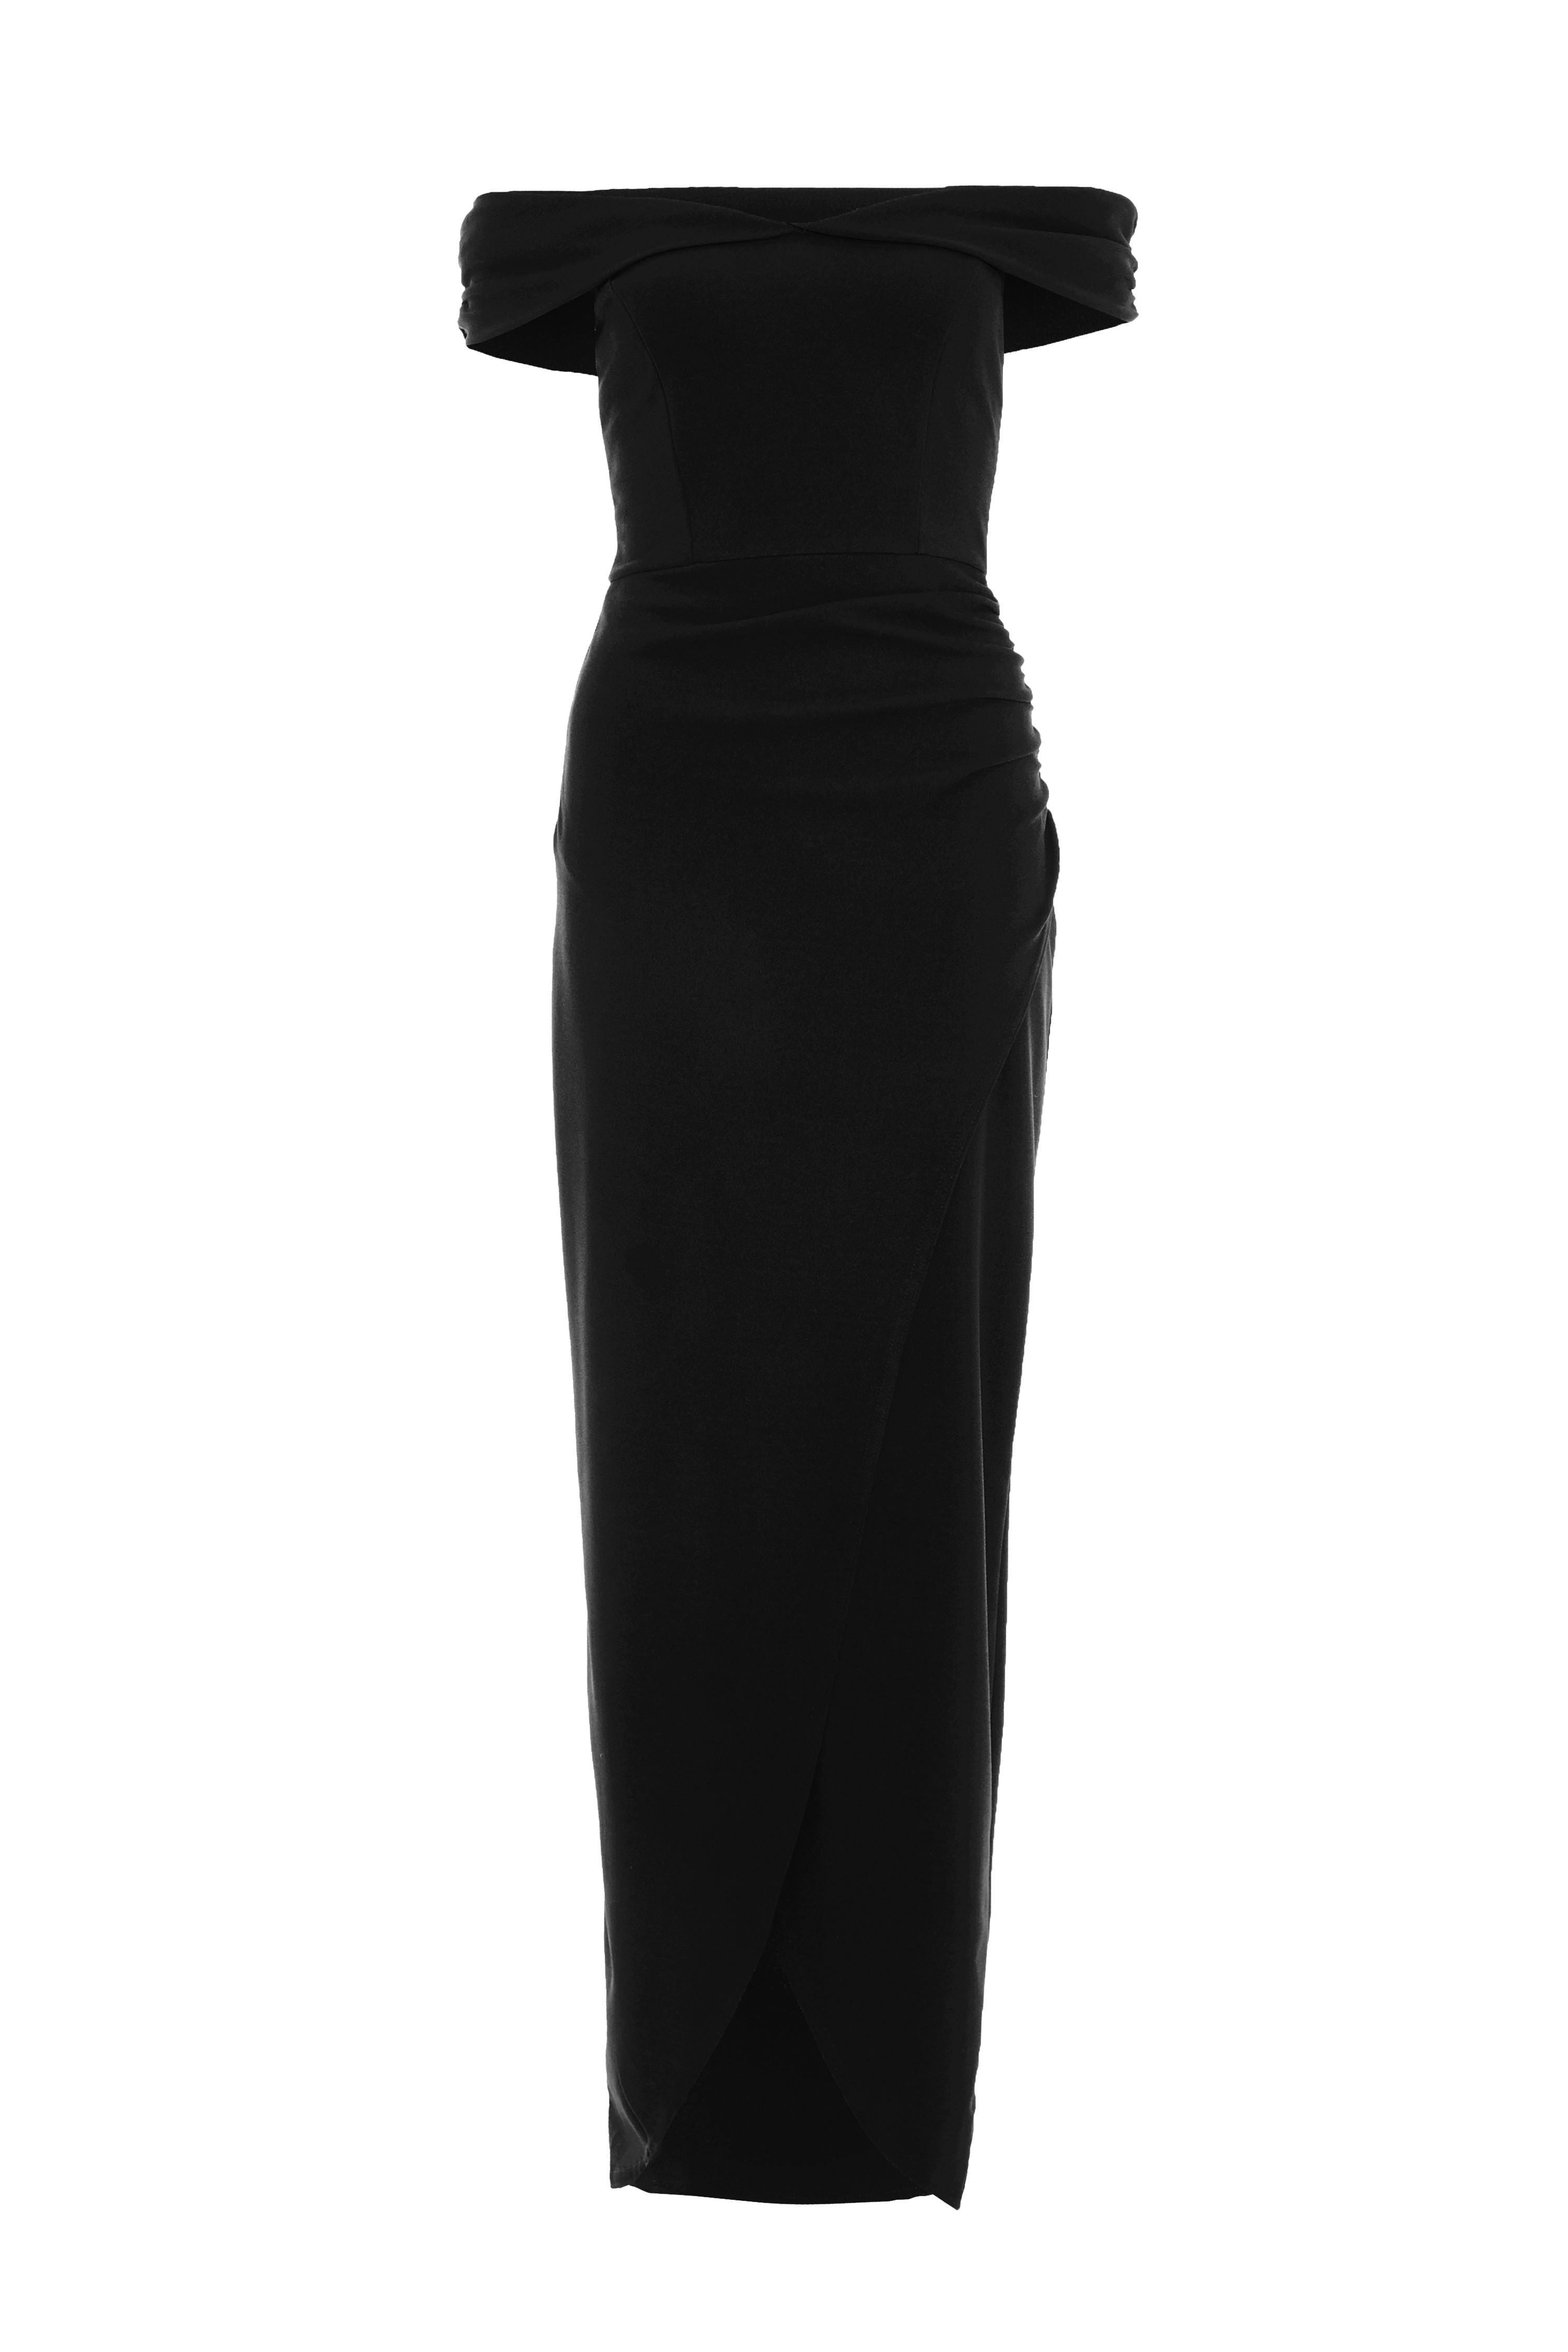 High Waisted Black Maxi Dress with Rushed Detail | Image